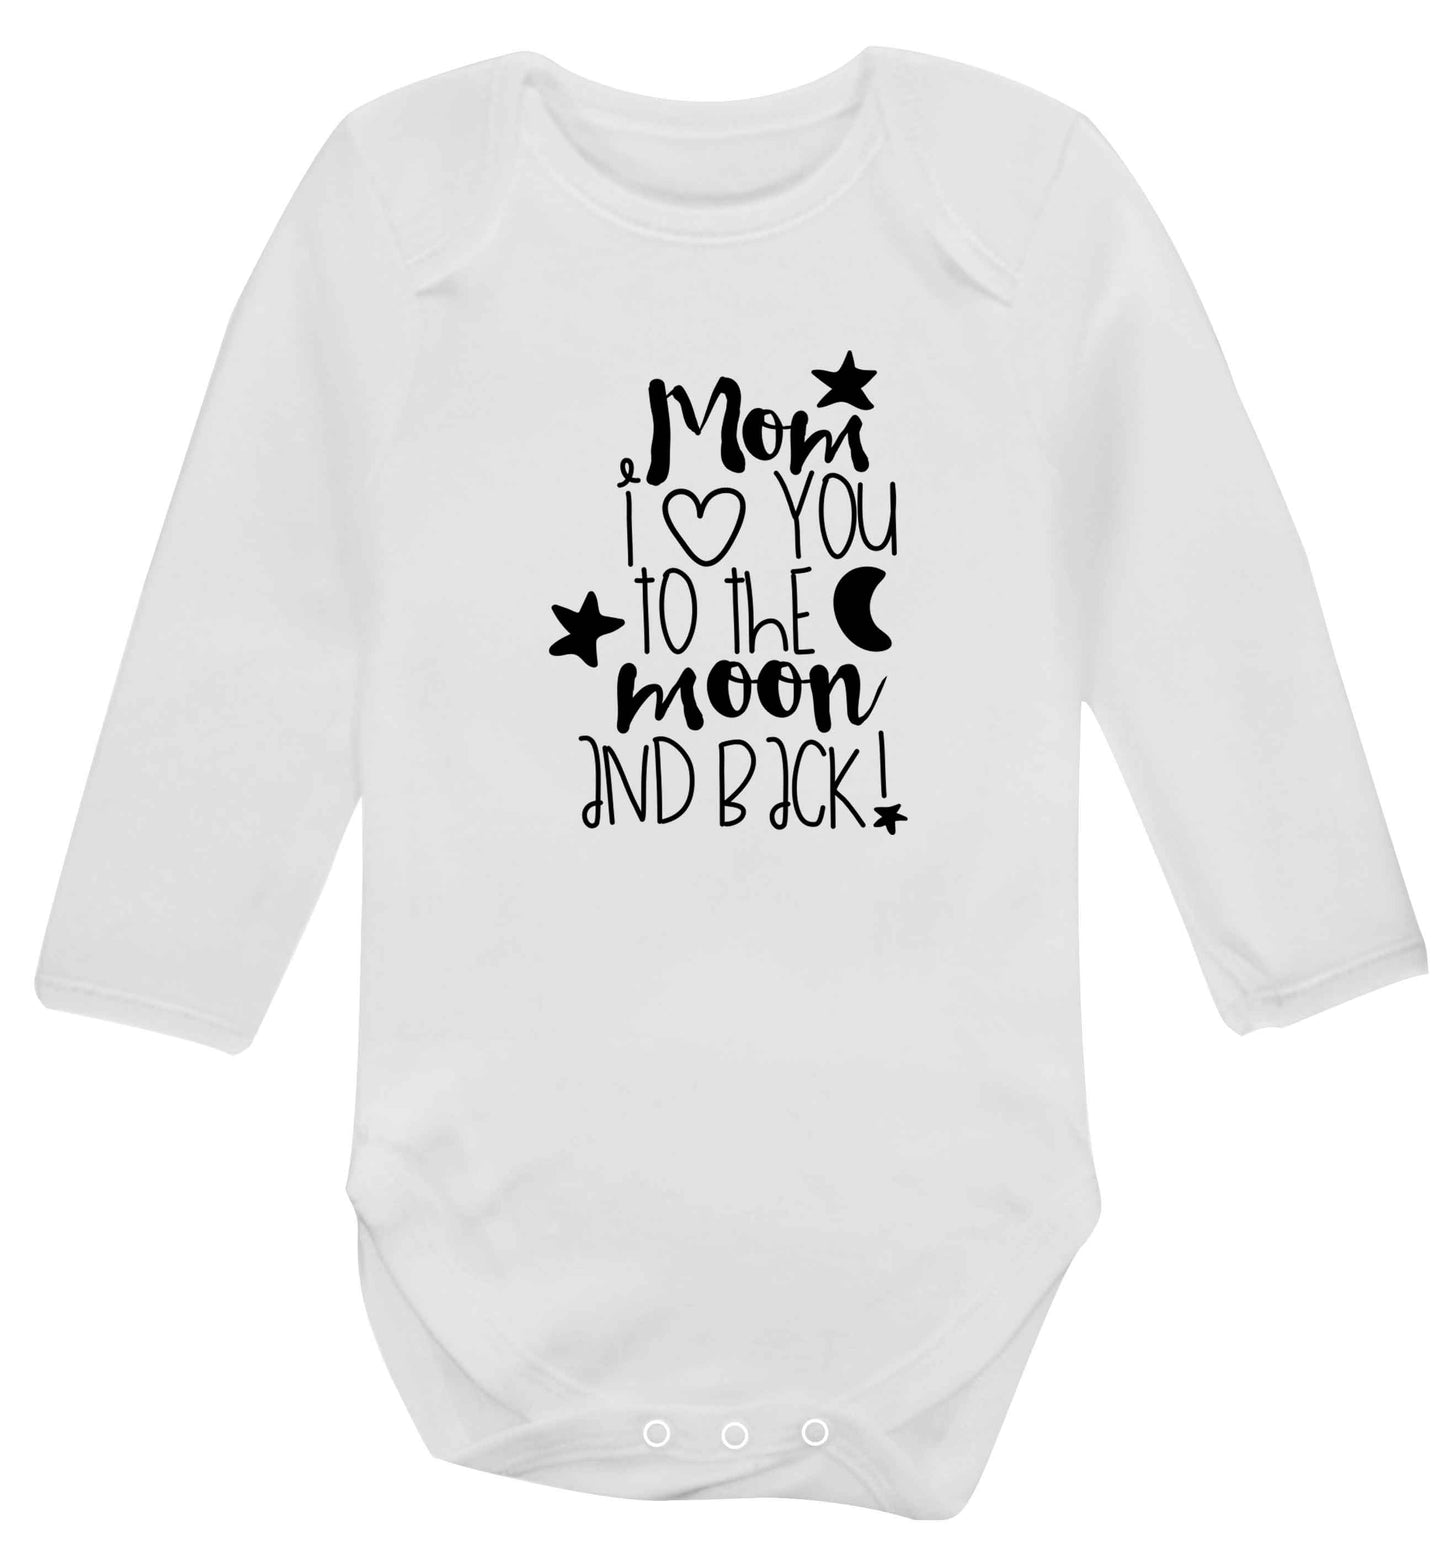 Mom I love you to the moon and back baby vest long sleeved white 6-12 months